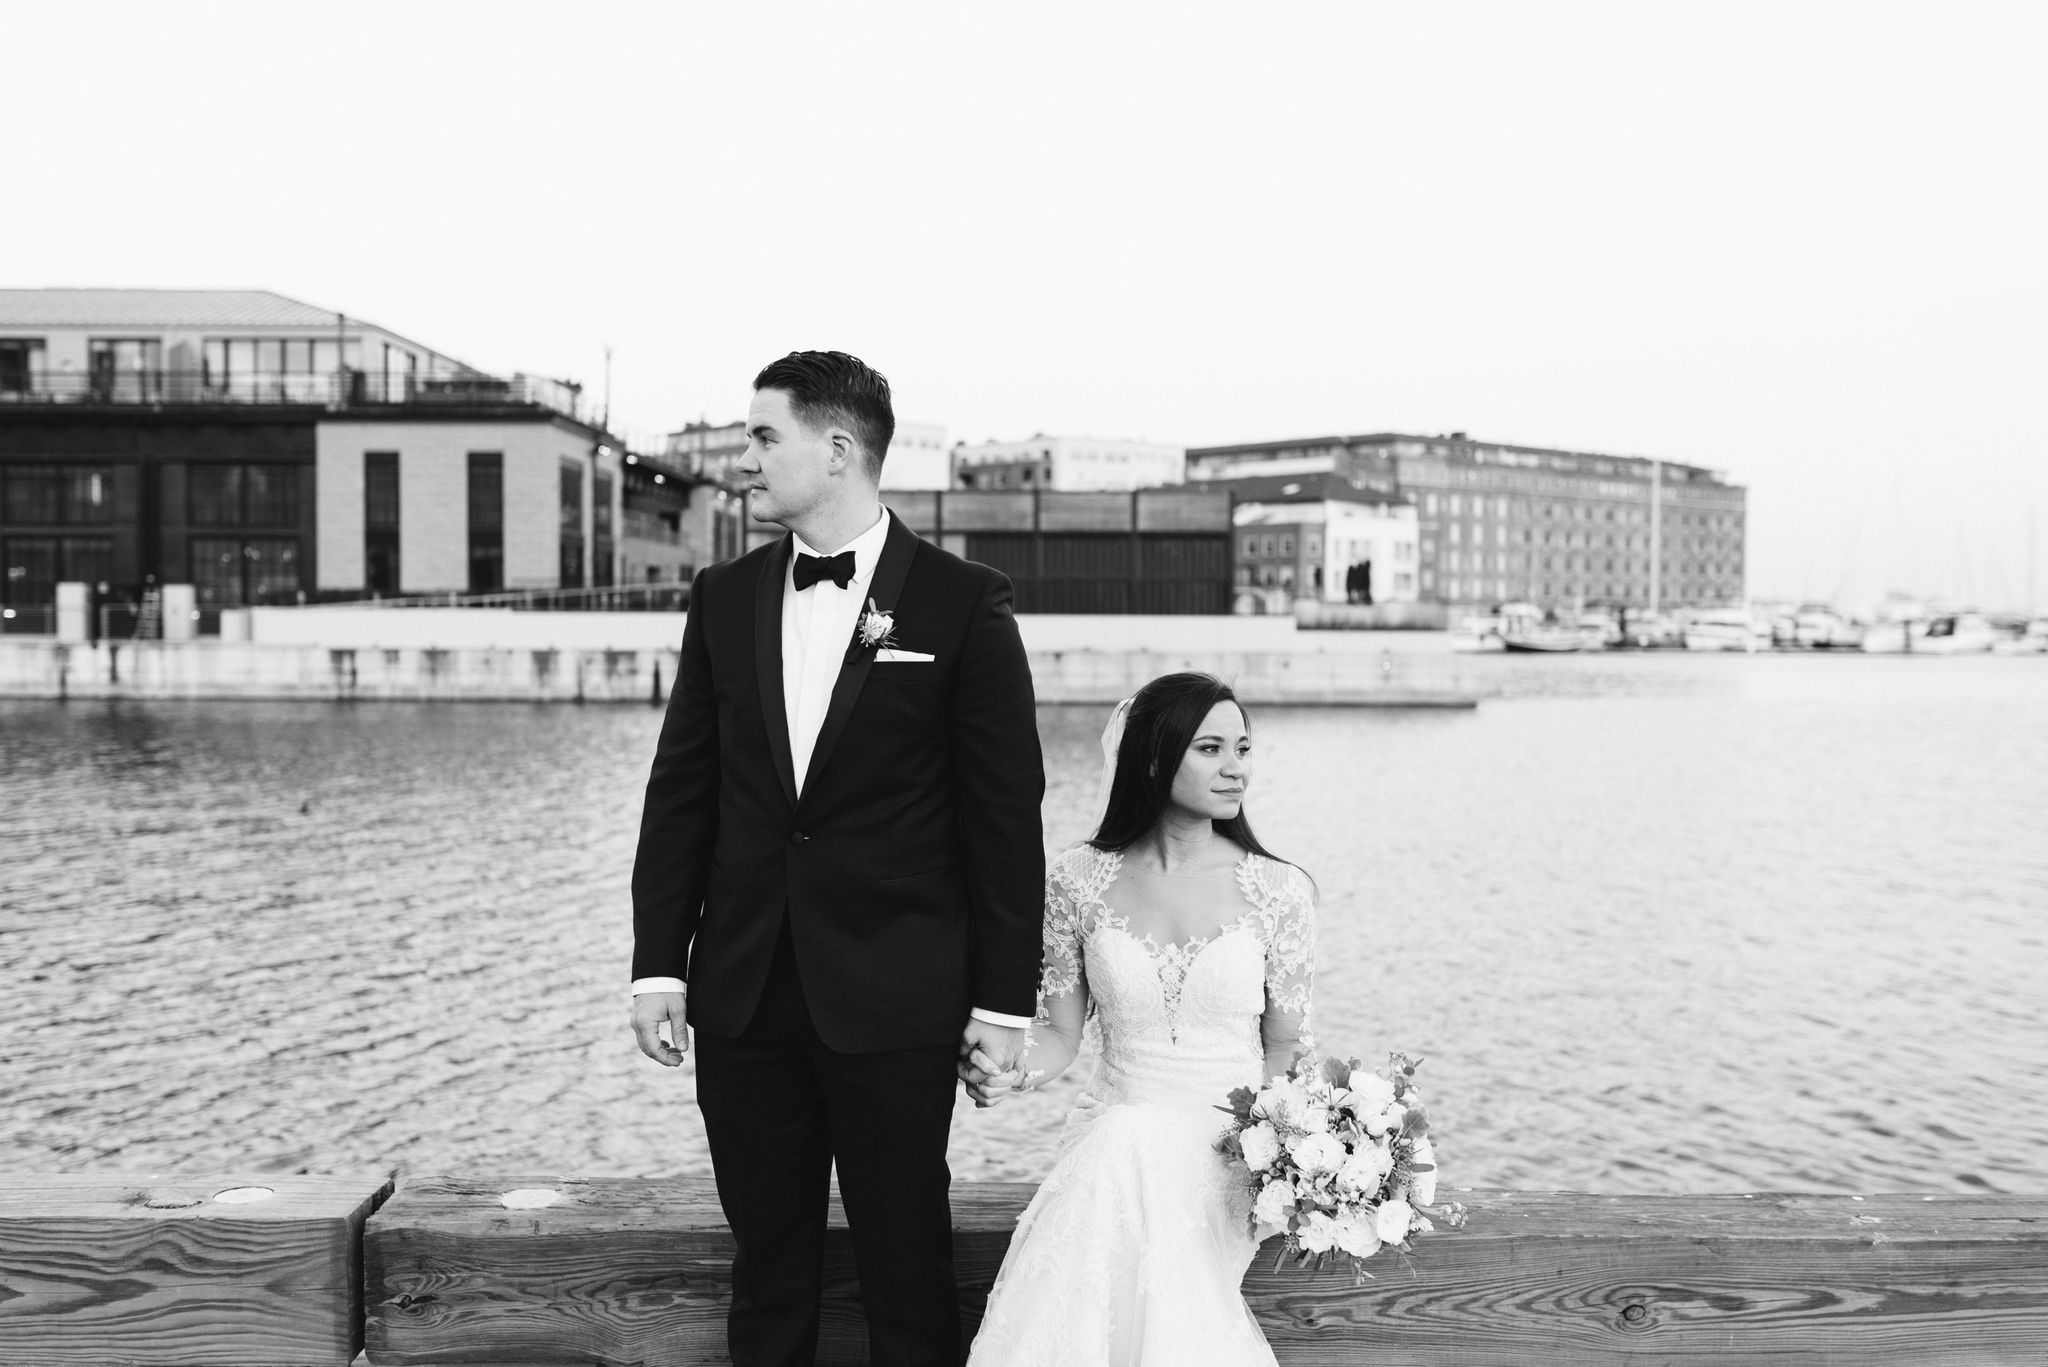  Baltimore, Fells Point, Maryland Wedding Photographer, Winter Wedding, Historic, Classic, Vintage, Portrait of Bride and Groom Sitting in Front of Water, Inner Harbor, Black and White Photo 